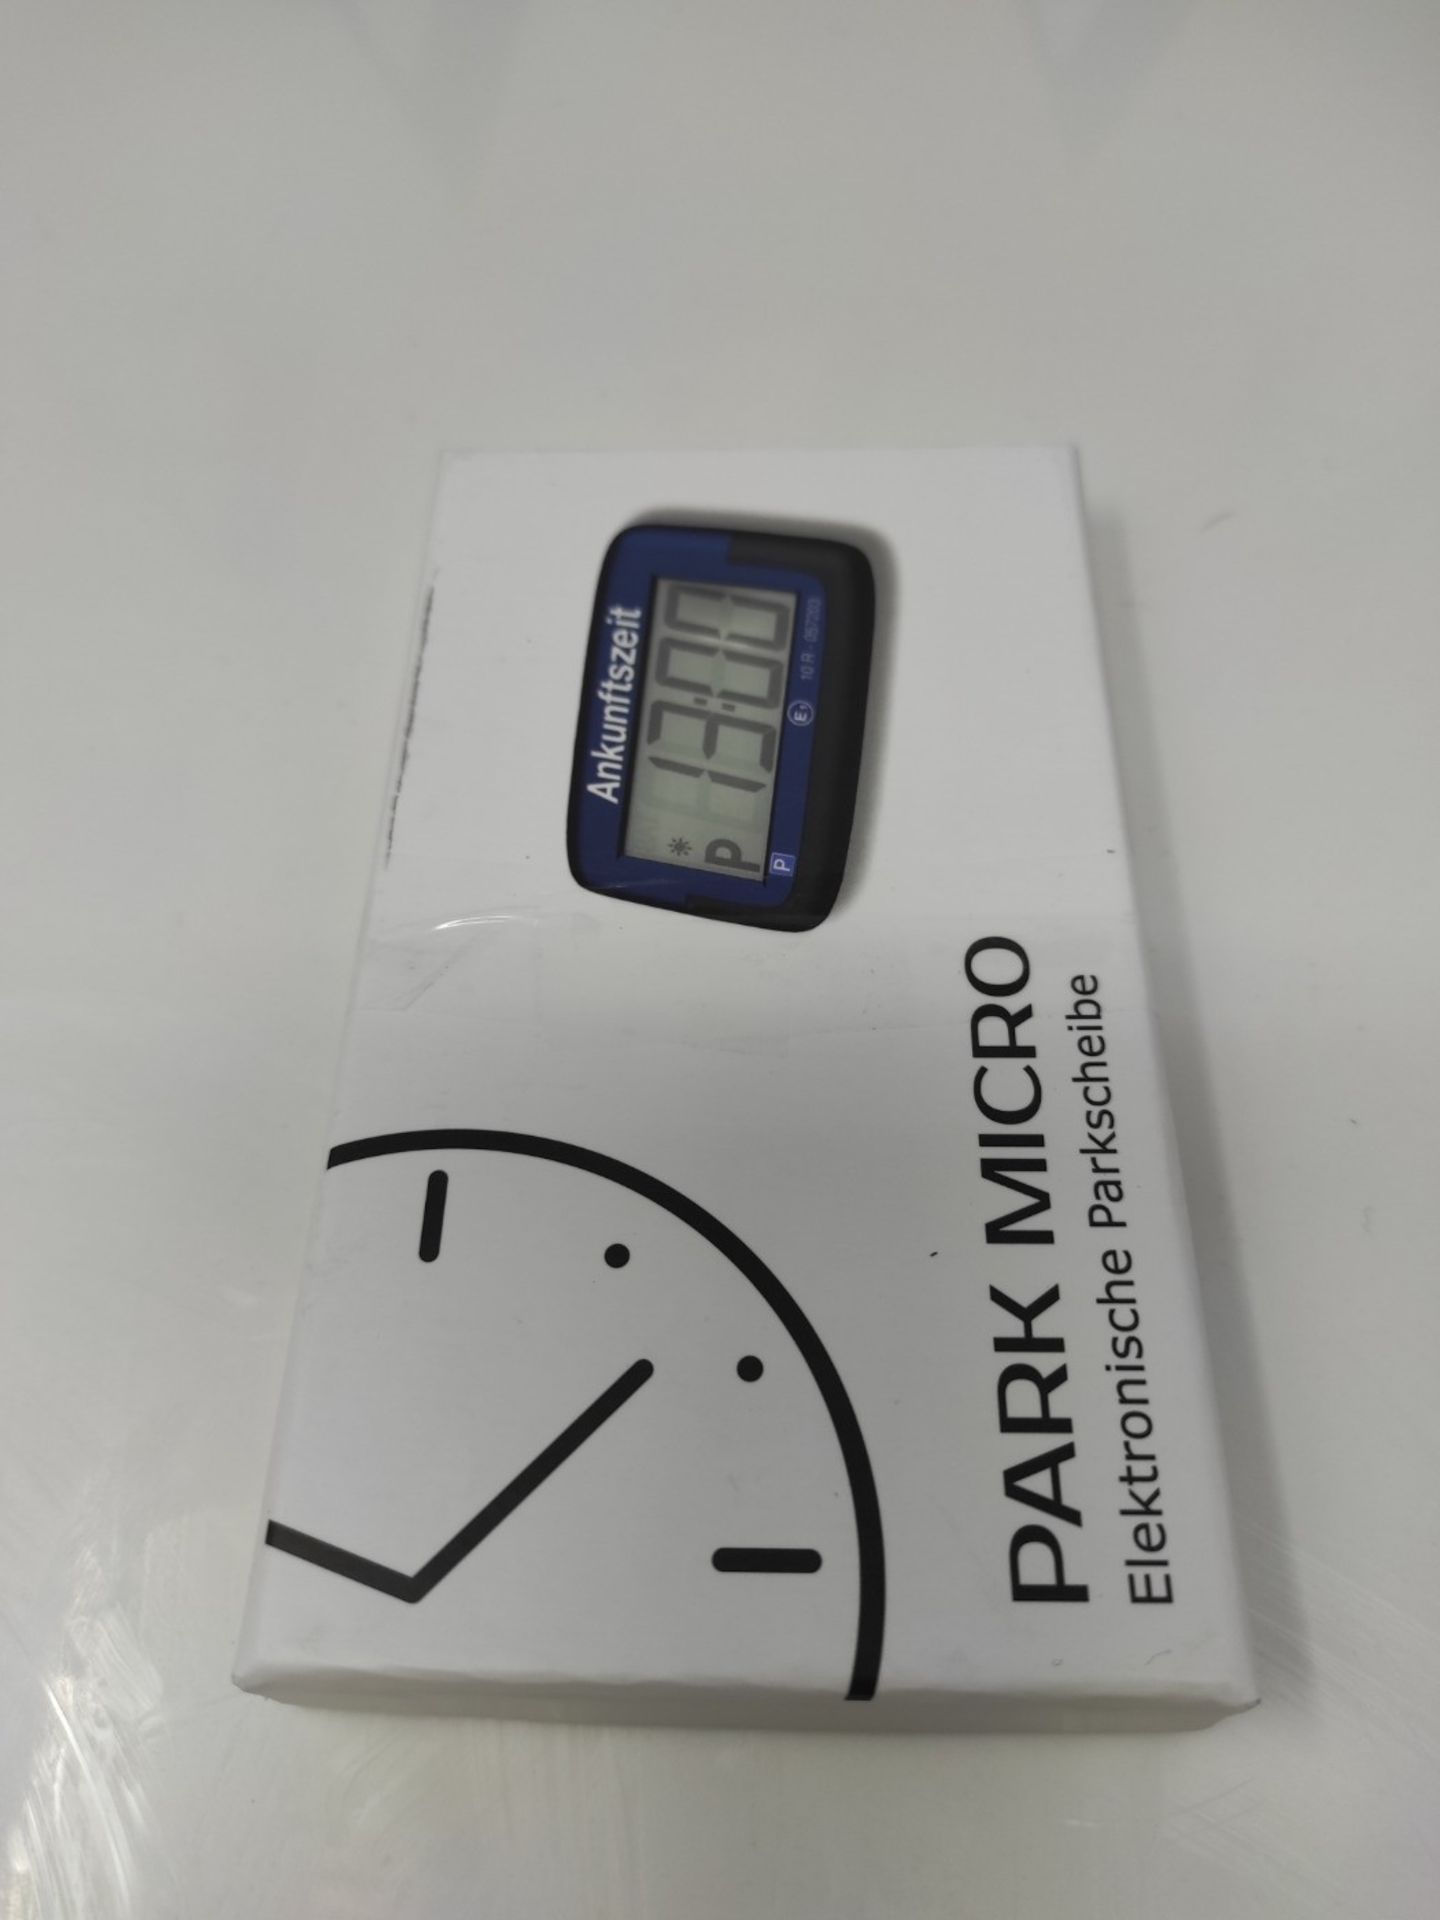 Needit Park Micro electronic parking disc with approval I Digital parking clock Micro - Image 2 of 3